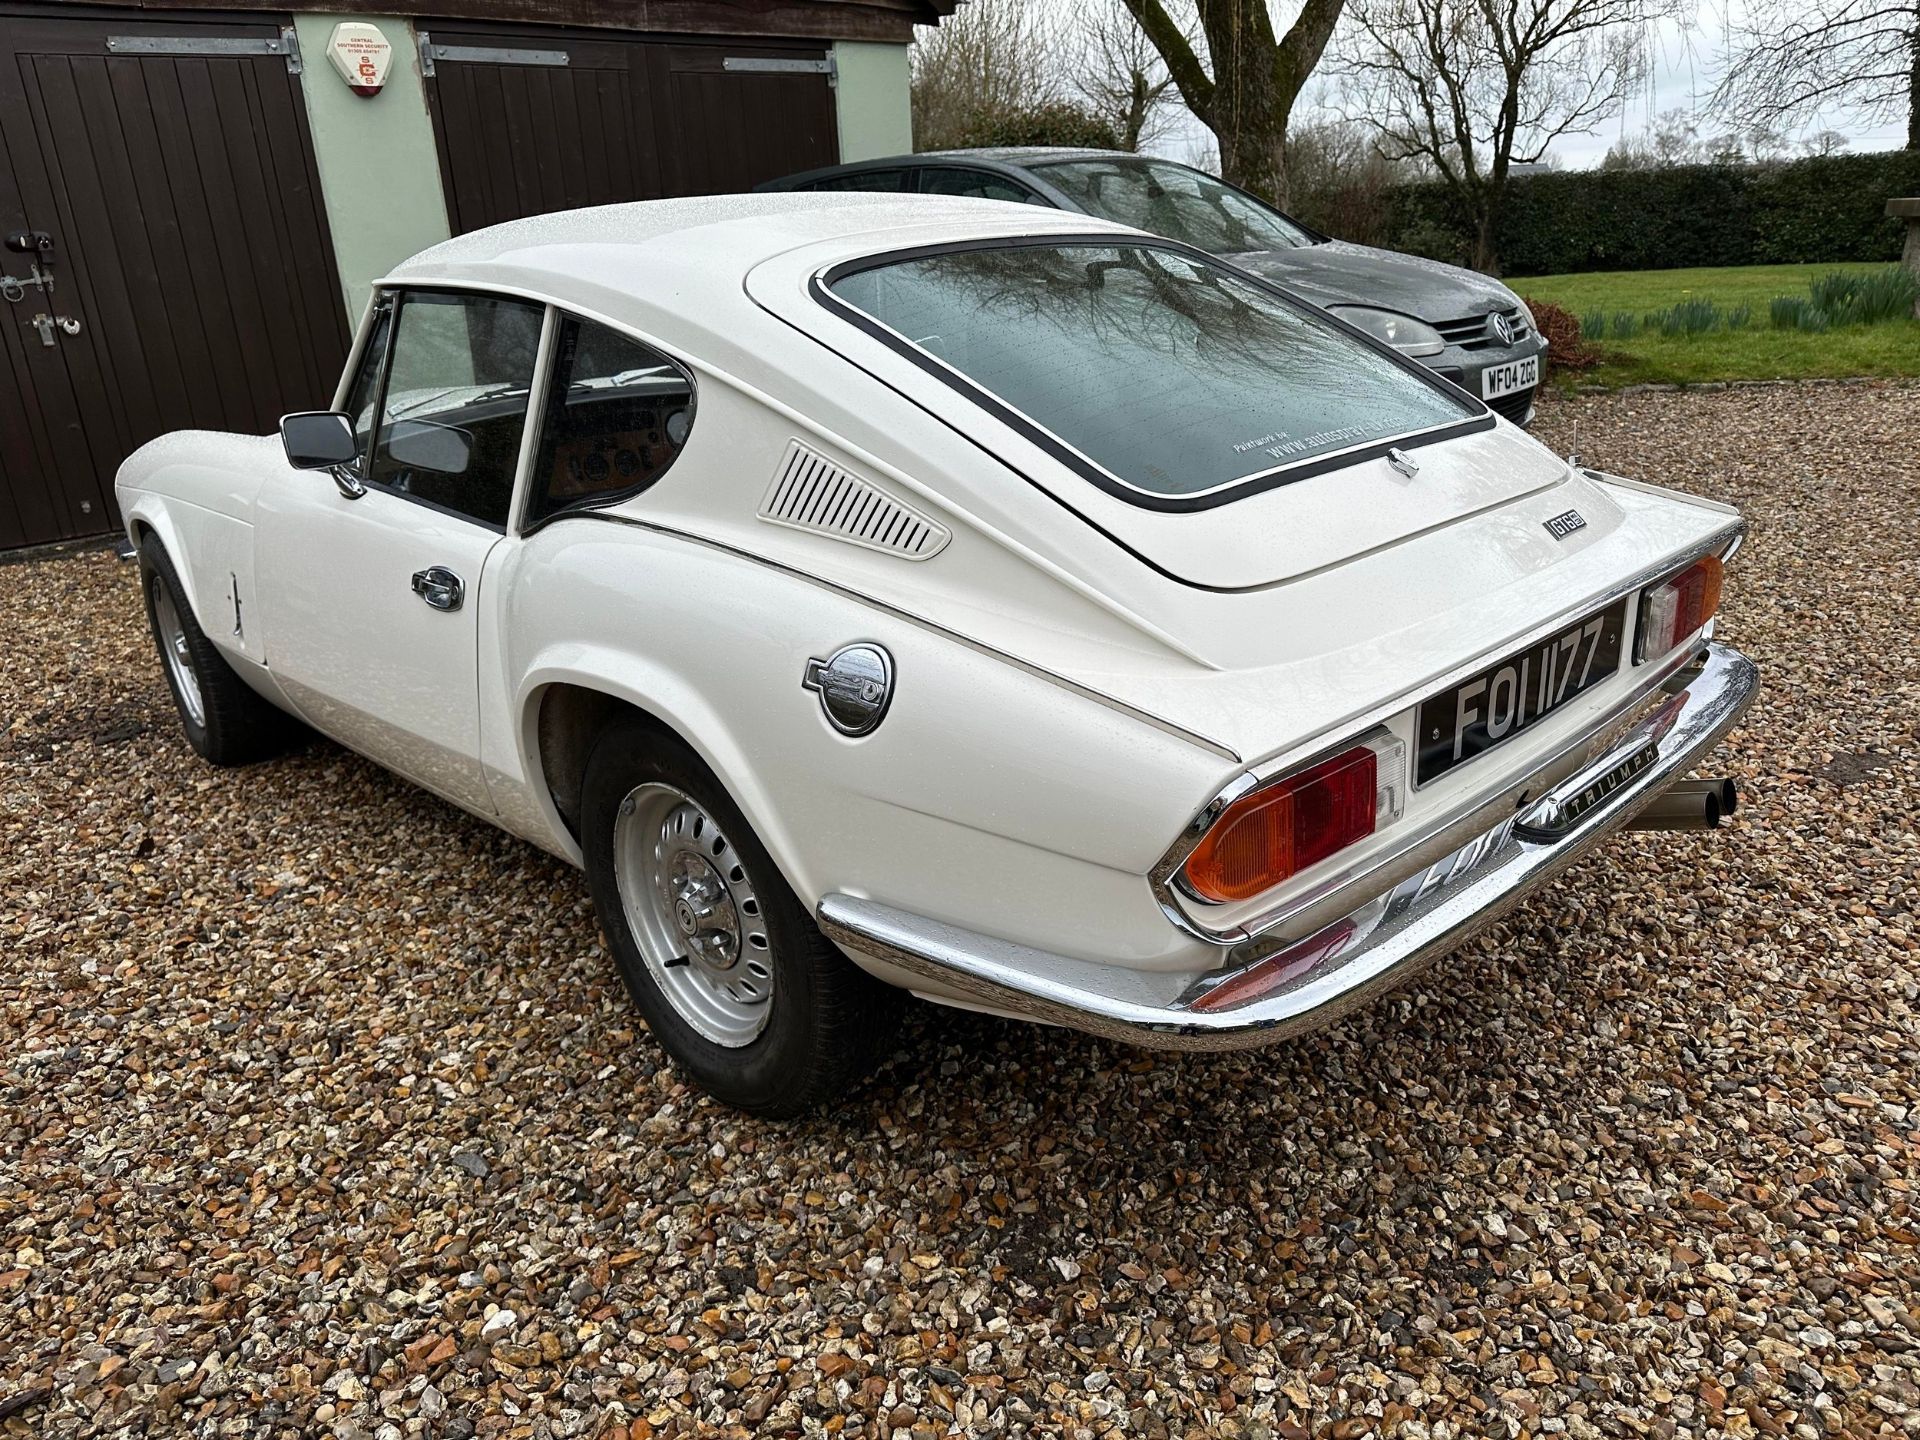 1973 Triumph GT6 Registration number FOI 1177 Chassis number KE145270 Engine number 24517 White with - Image 6 of 34